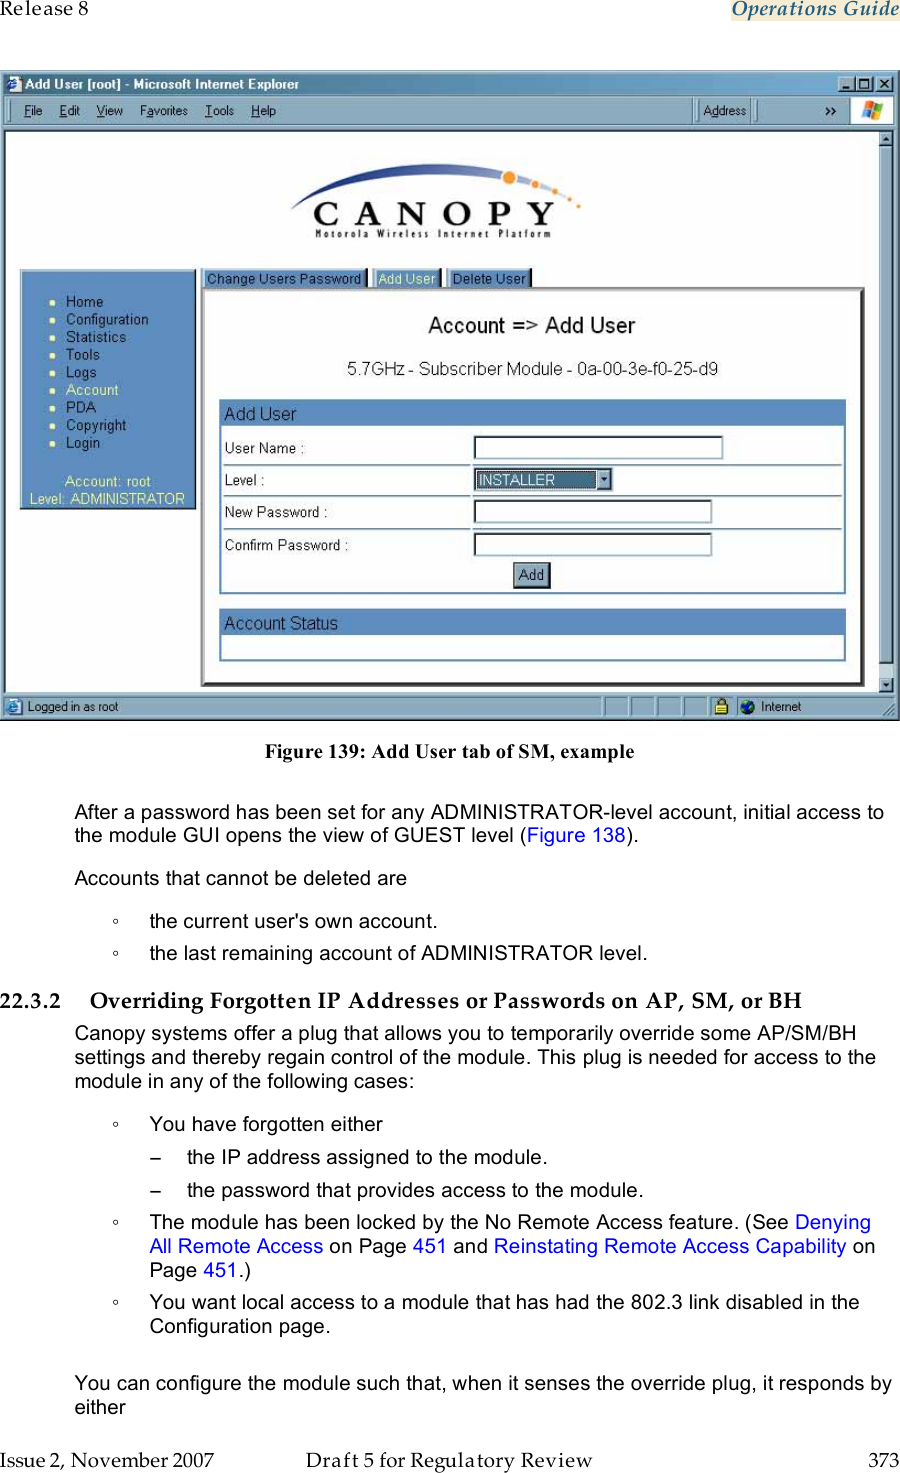 Release 8    Operations Guide   Issue 2, November 2007  Draft 5 for Regulatory Review  373      Figure 139: Add User tab of SM, example  After a password has been set for any ADMINISTRATOR-level account, initial access to the module GUI opens the view of GUEST level (Figure 138).  Accounts that cannot be deleted are ◦  the current user&apos;s own account. ◦  the last remaining account of ADMINISTRATOR level. 22.3.2 Overriding Forgotten IP Addresses or Passwords on AP, SM, or BH Canopy systems offer a plug that allows you to temporarily override some AP/SM/BH settings and thereby regain control of the module. This plug is needed for access to the module in any of the following cases: ◦  You have forgotten either −  the IP address assigned to the module. −  the password that provides access to the module. ◦  The module has been locked by the No Remote Access feature. (See Denying All Remote Access on Page 451 and Reinstating Remote Access Capability on Page 451.) ◦  You want local access to a module that has had the 802.3 link disabled in the Configuration page.  You can configure the module such that, when it senses the override plug, it responds by either 